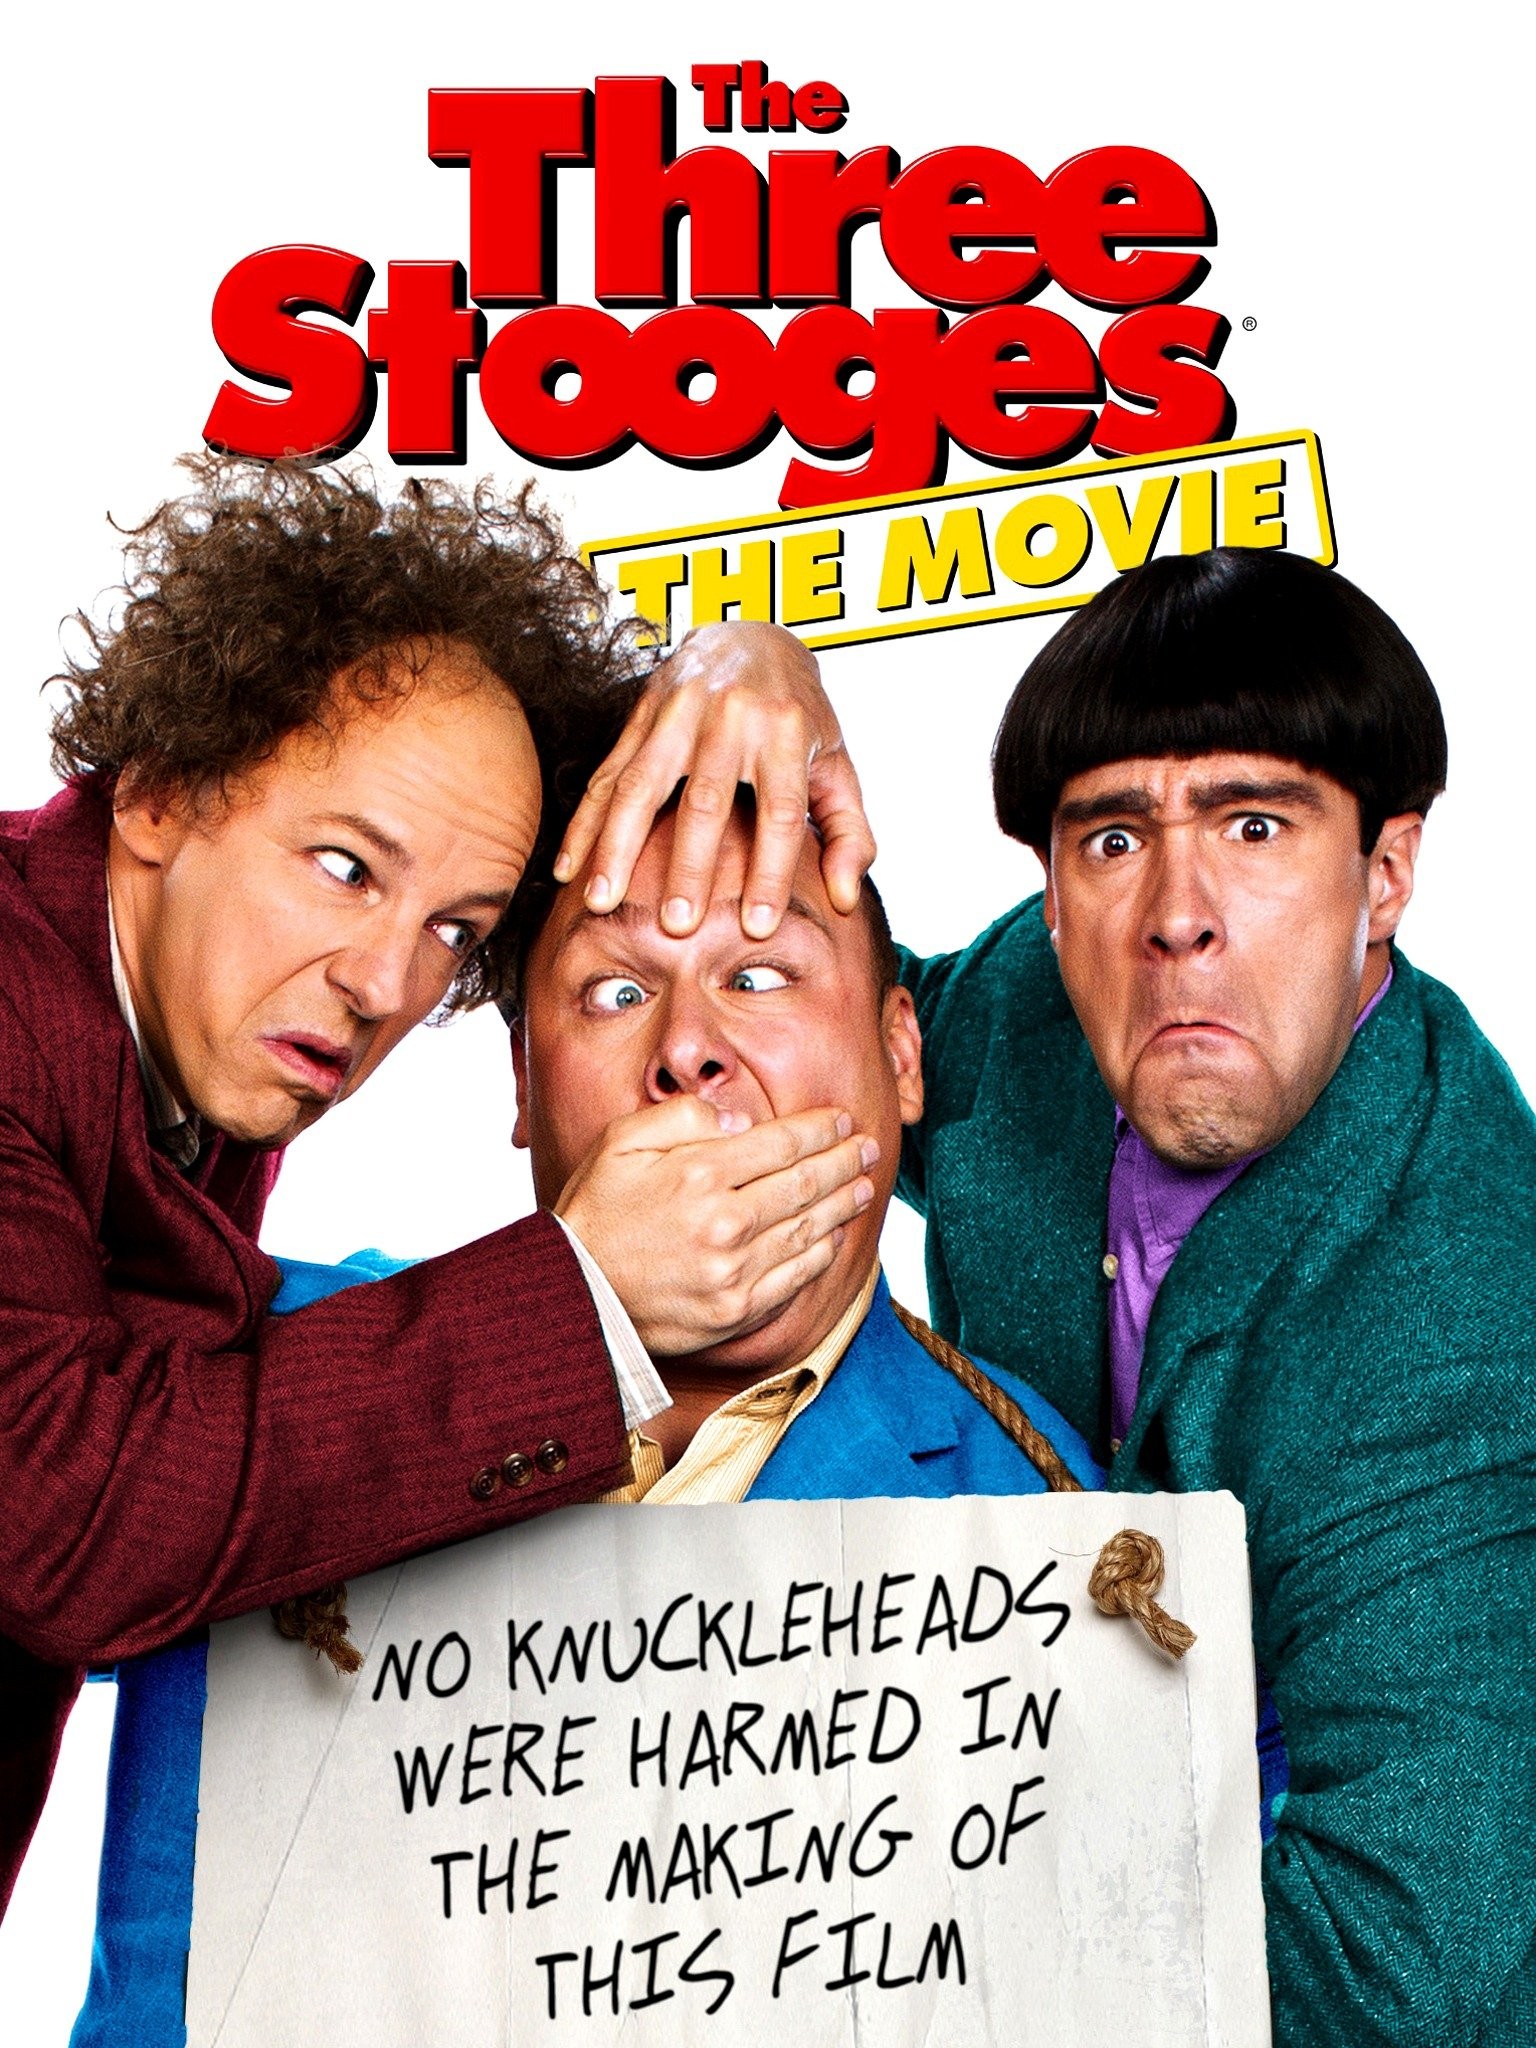 The Three Stooges | Rotten Tomatoes